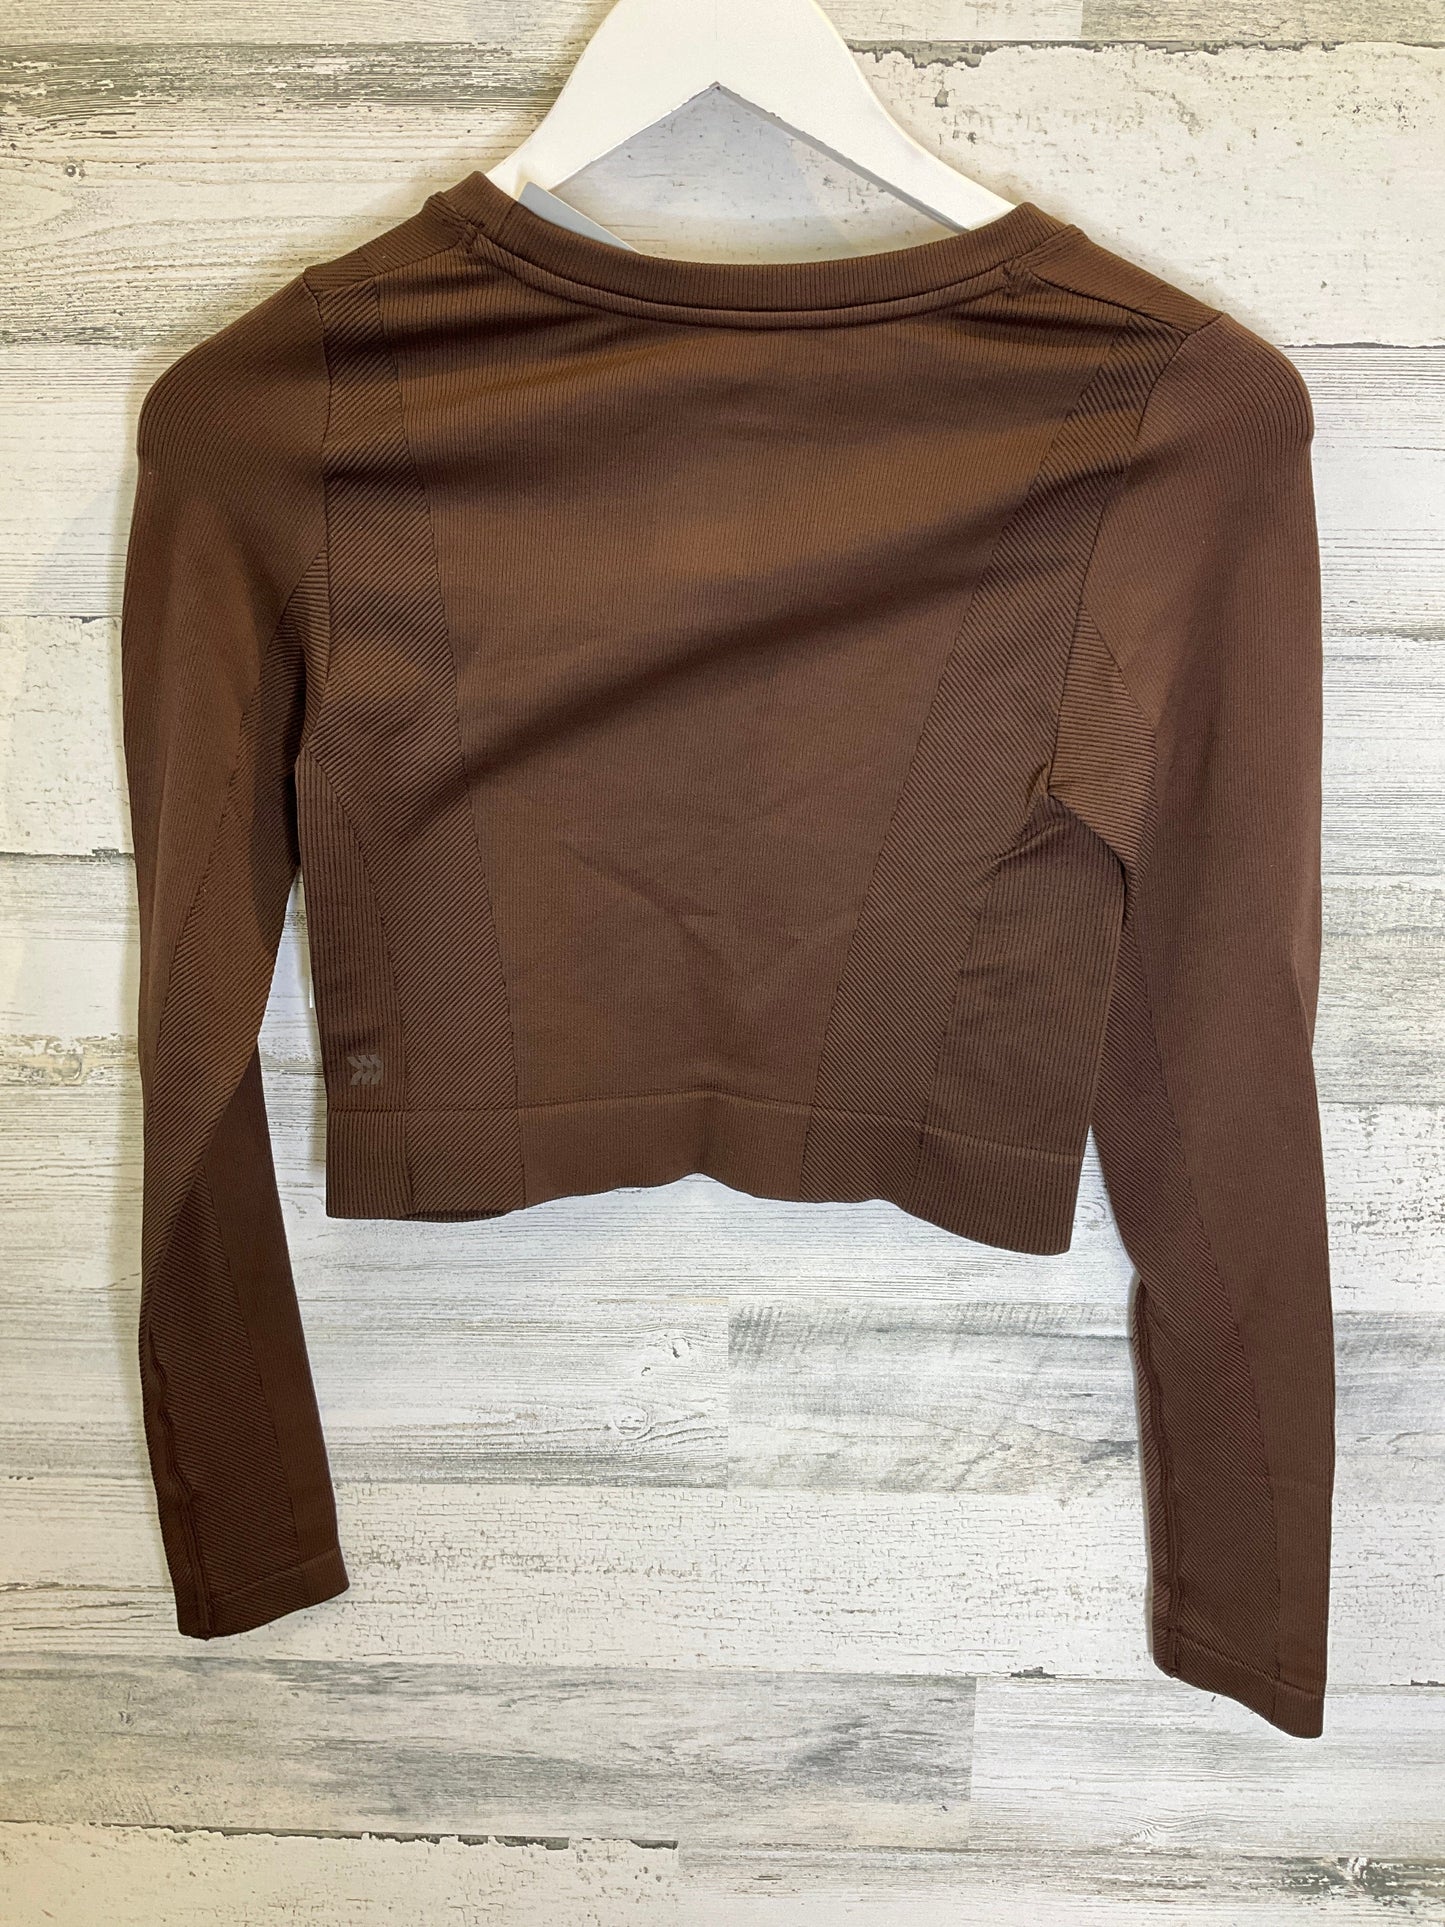 Brown Athletic Top Long Sleeve Crewneck All In Motion, Size S